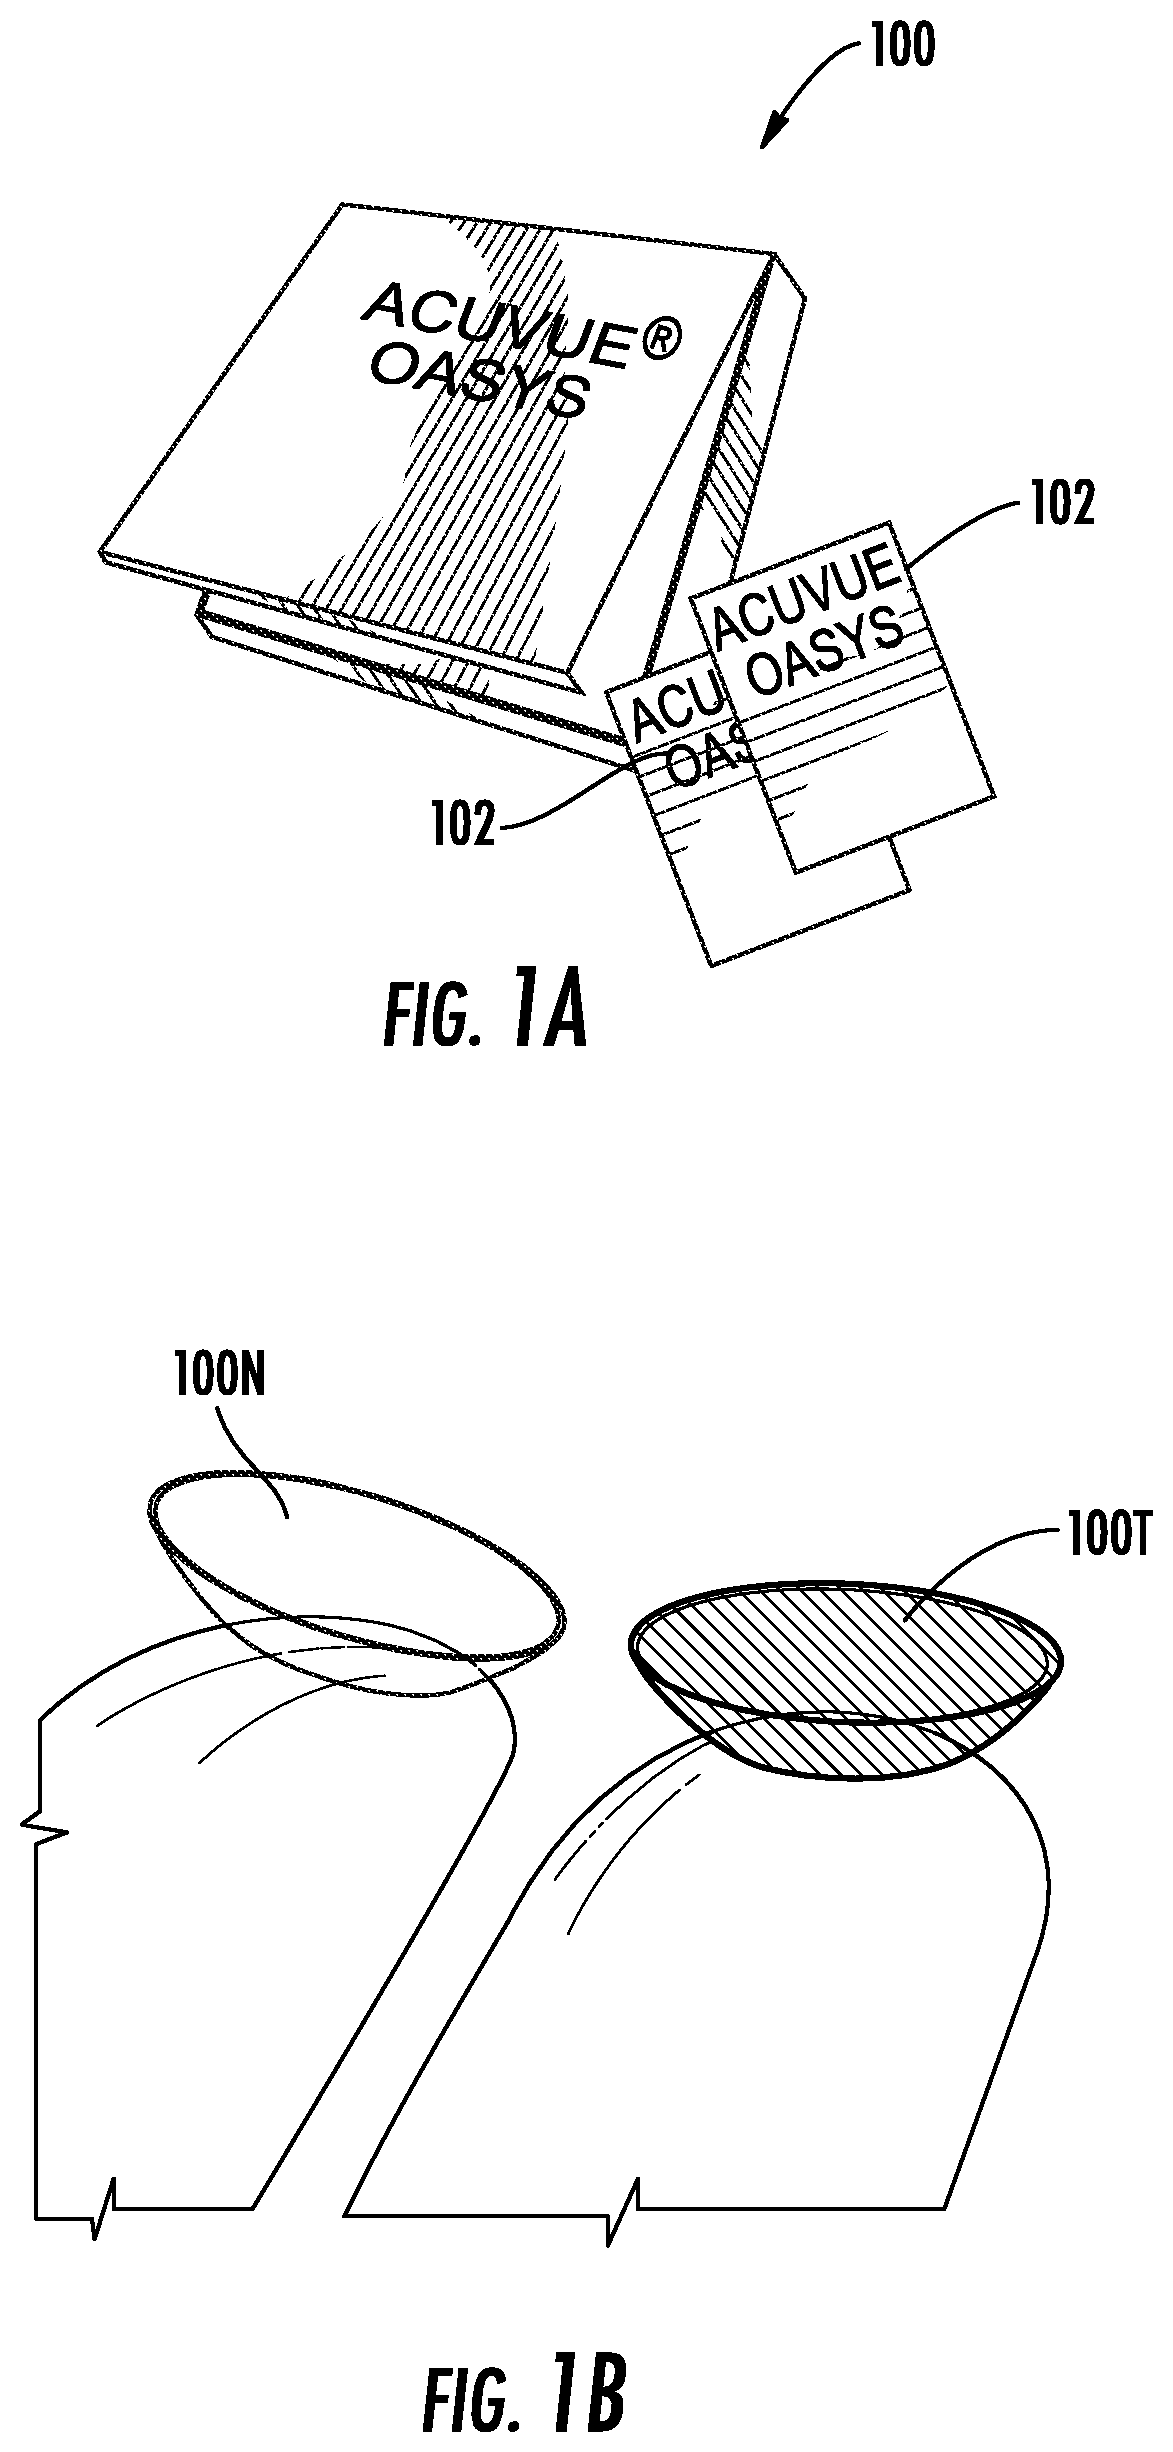 Light-sensitive photochromic contact lens demonstration devices and related methods